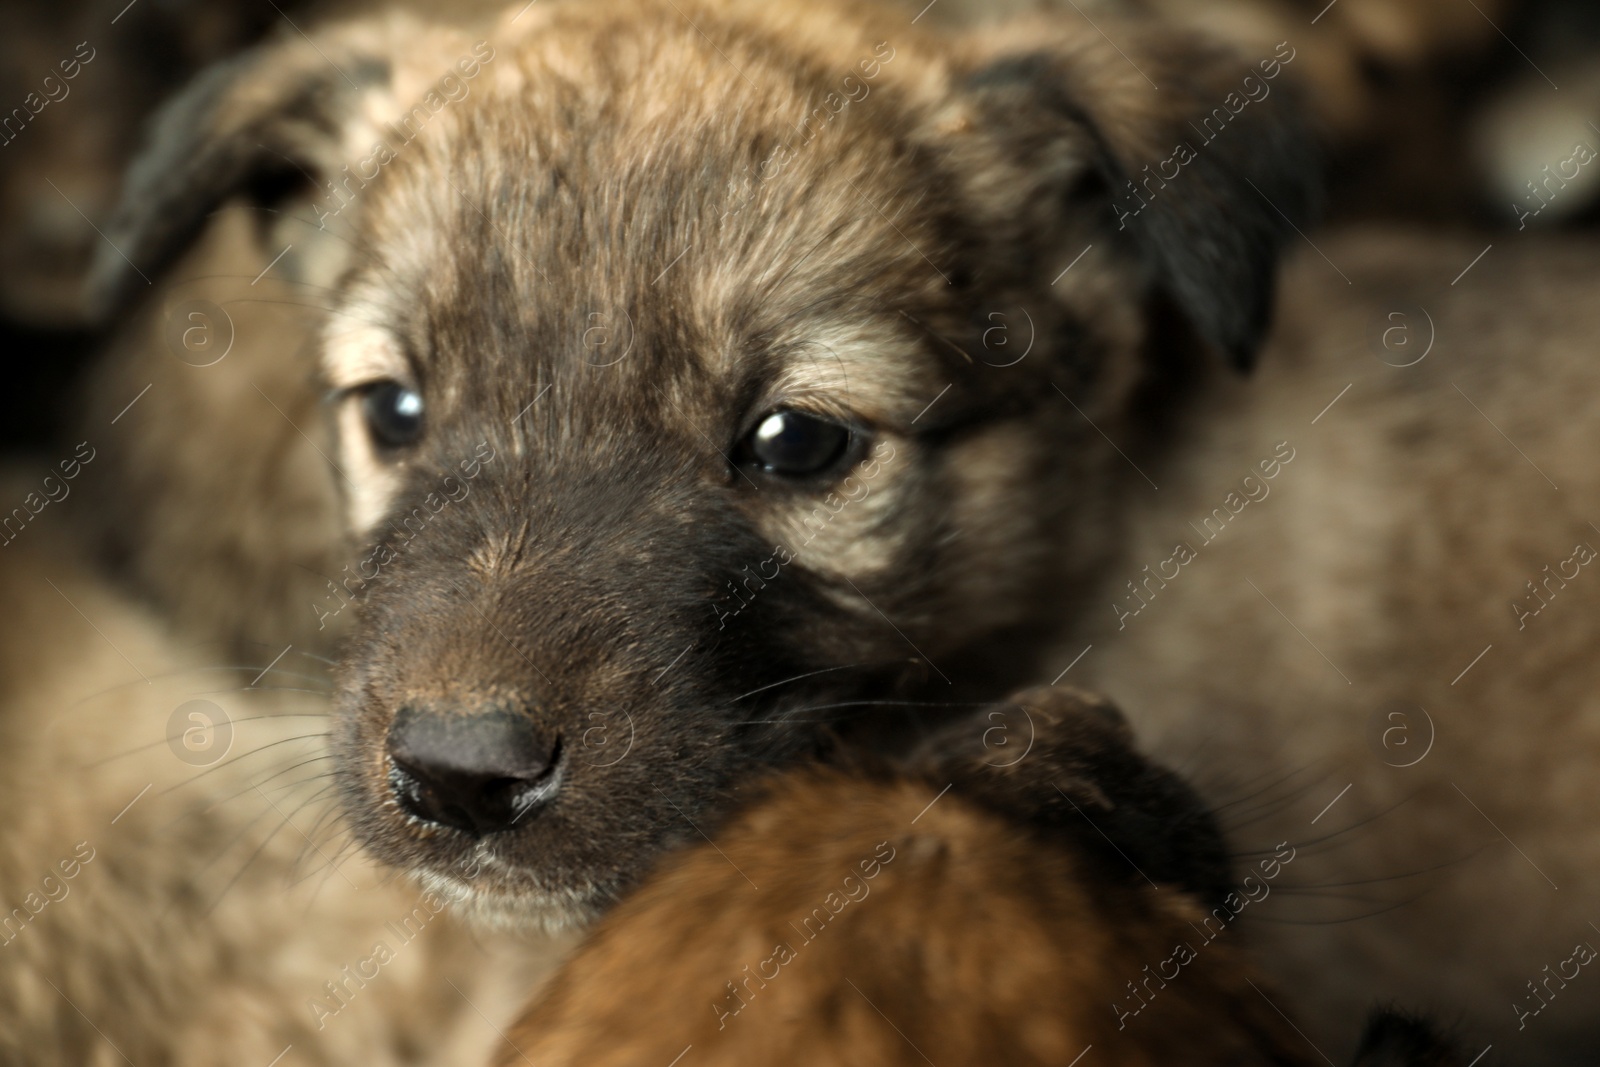 Photo of Homeless puppies, closeup view. Stray baby animals